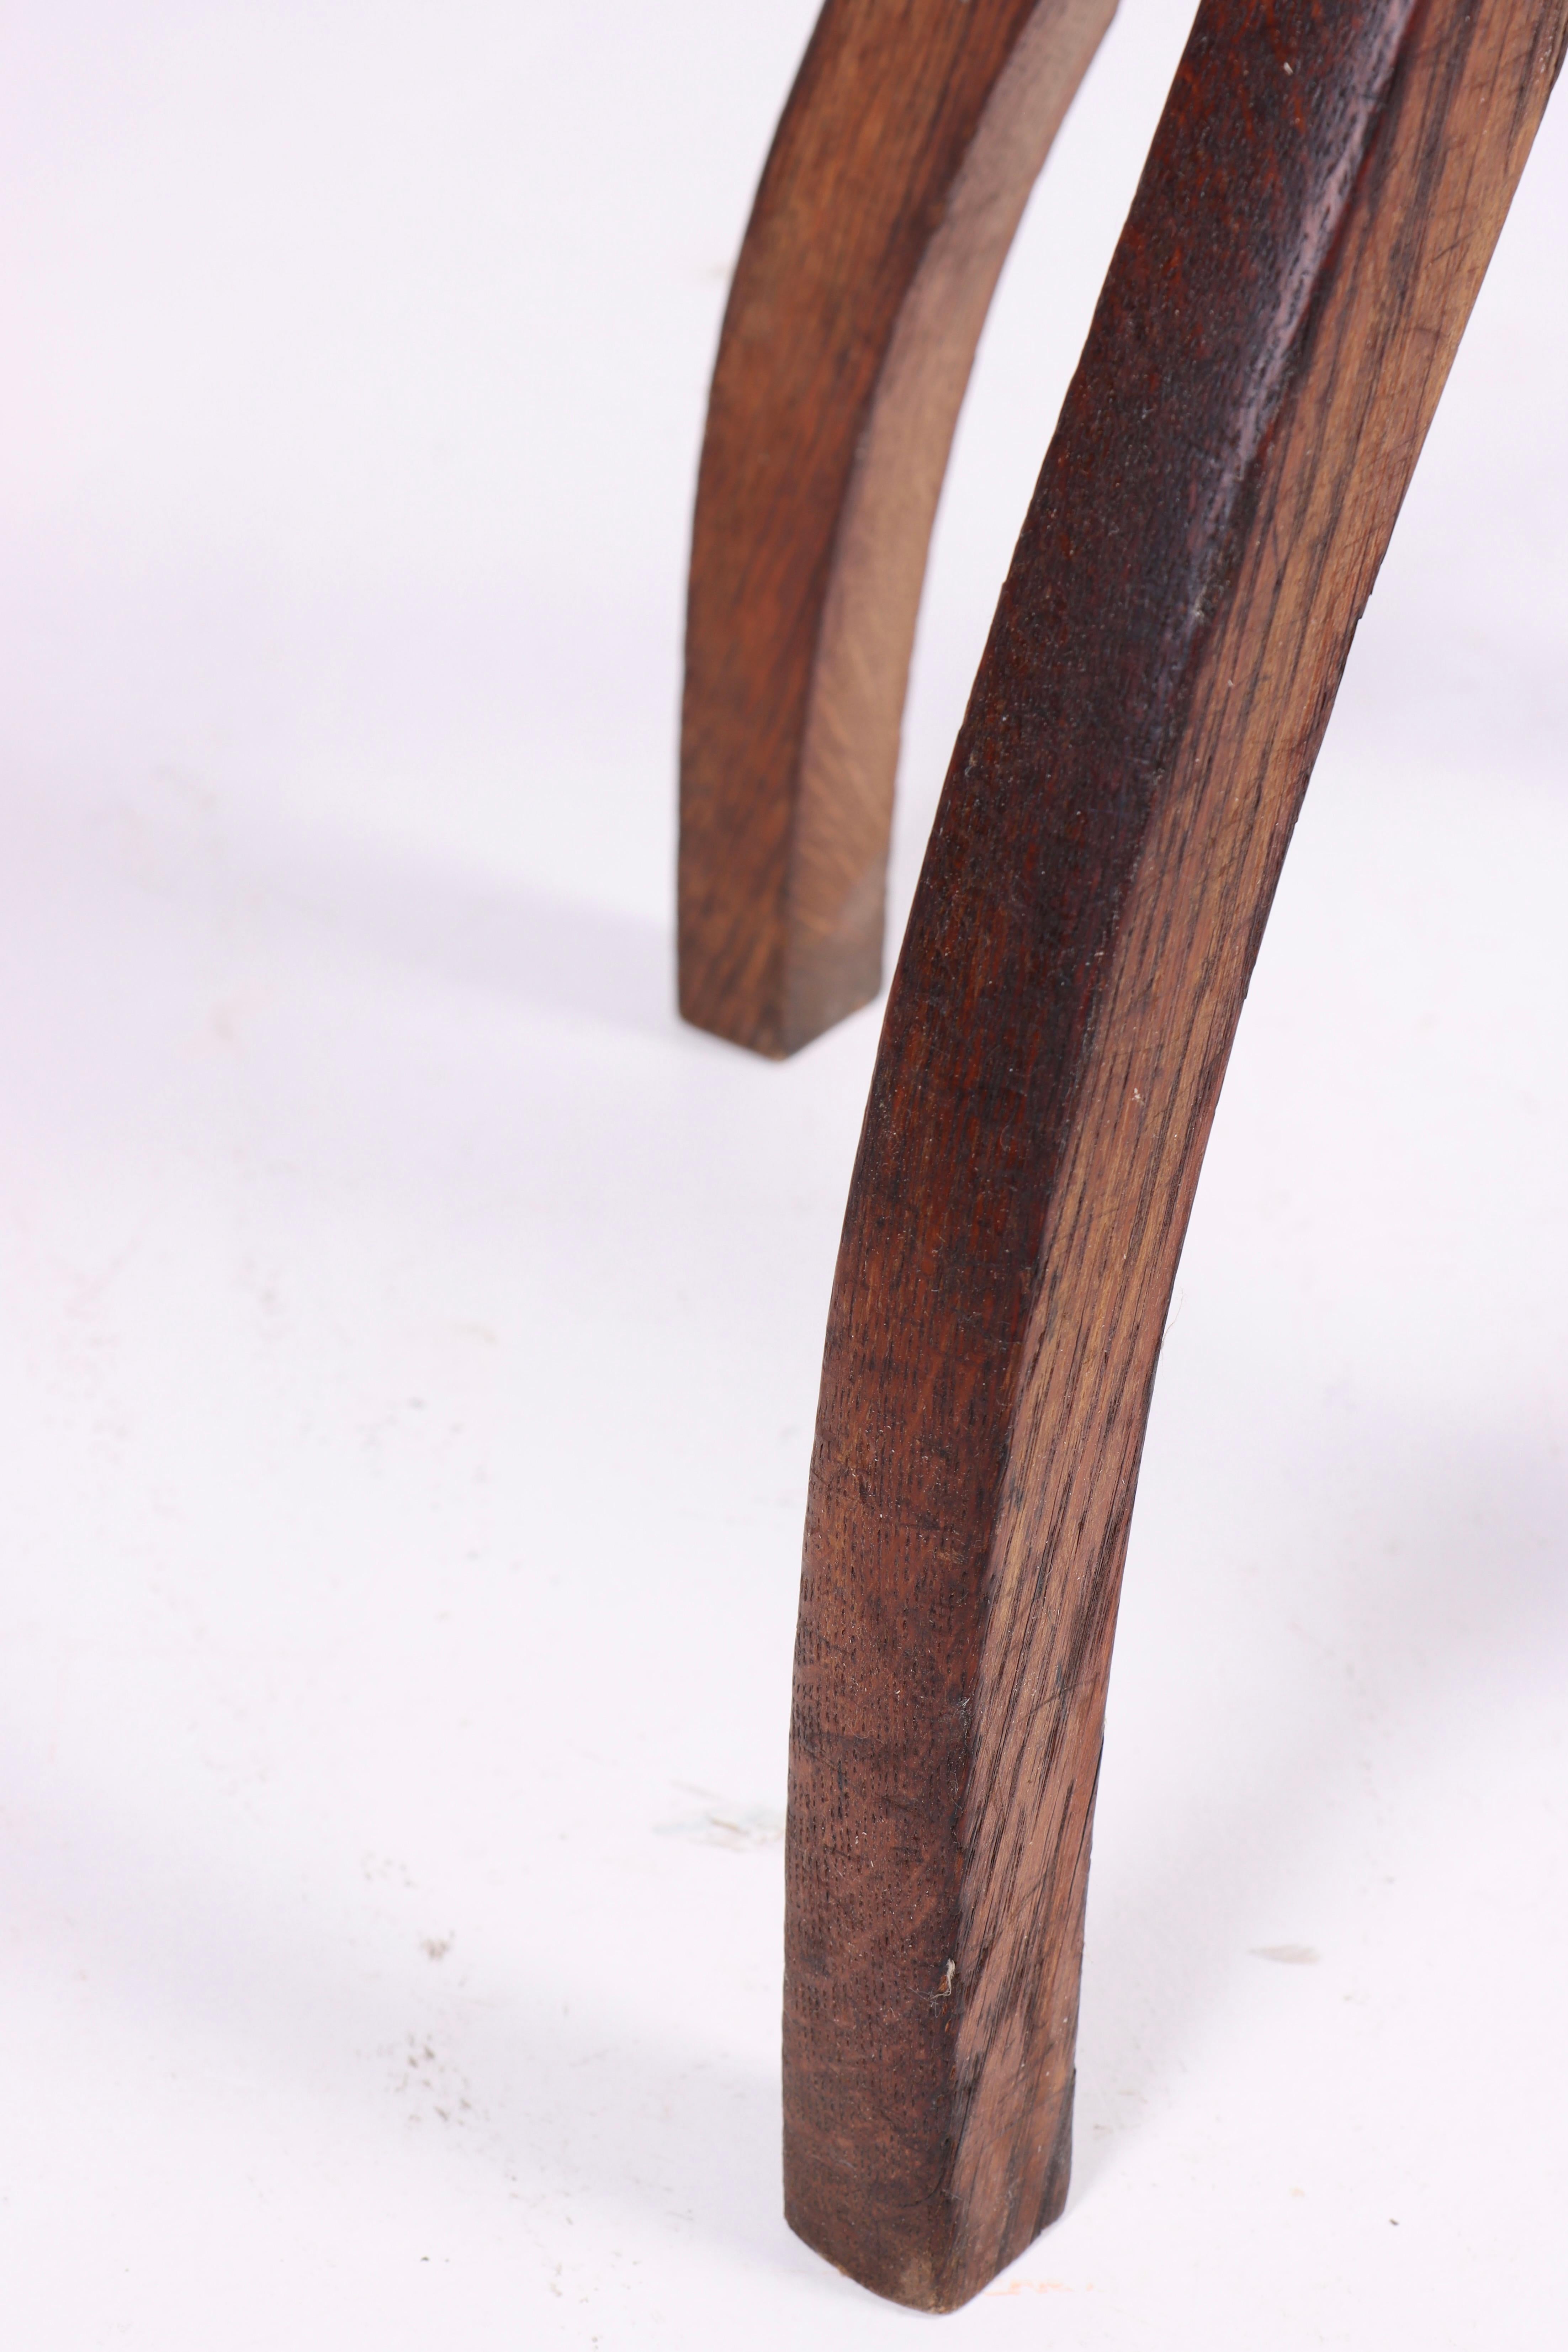 Adjustable Artist Stool in Oak and Patinated Leather, Denmark, 1930s For Sale 2